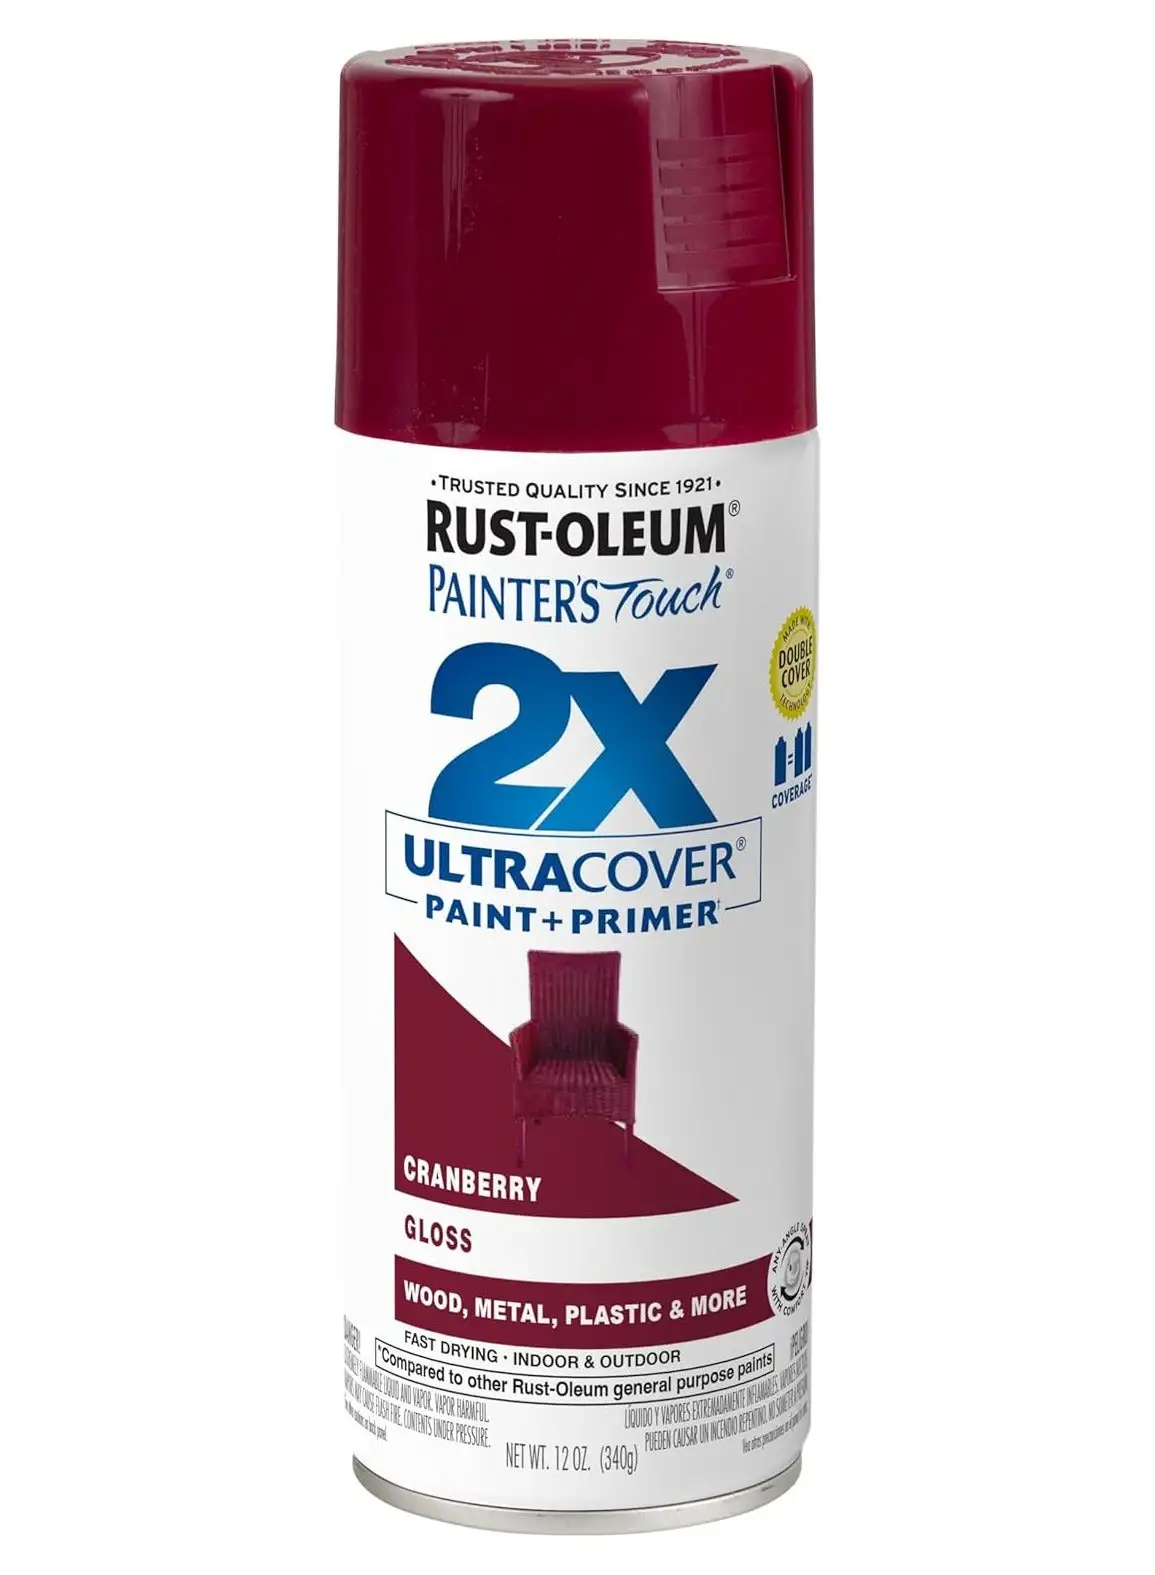 RUST-OLEUM Painter's Touch 2X 12 Oz Cranberry Cover Spray Paint Gloss - 249863